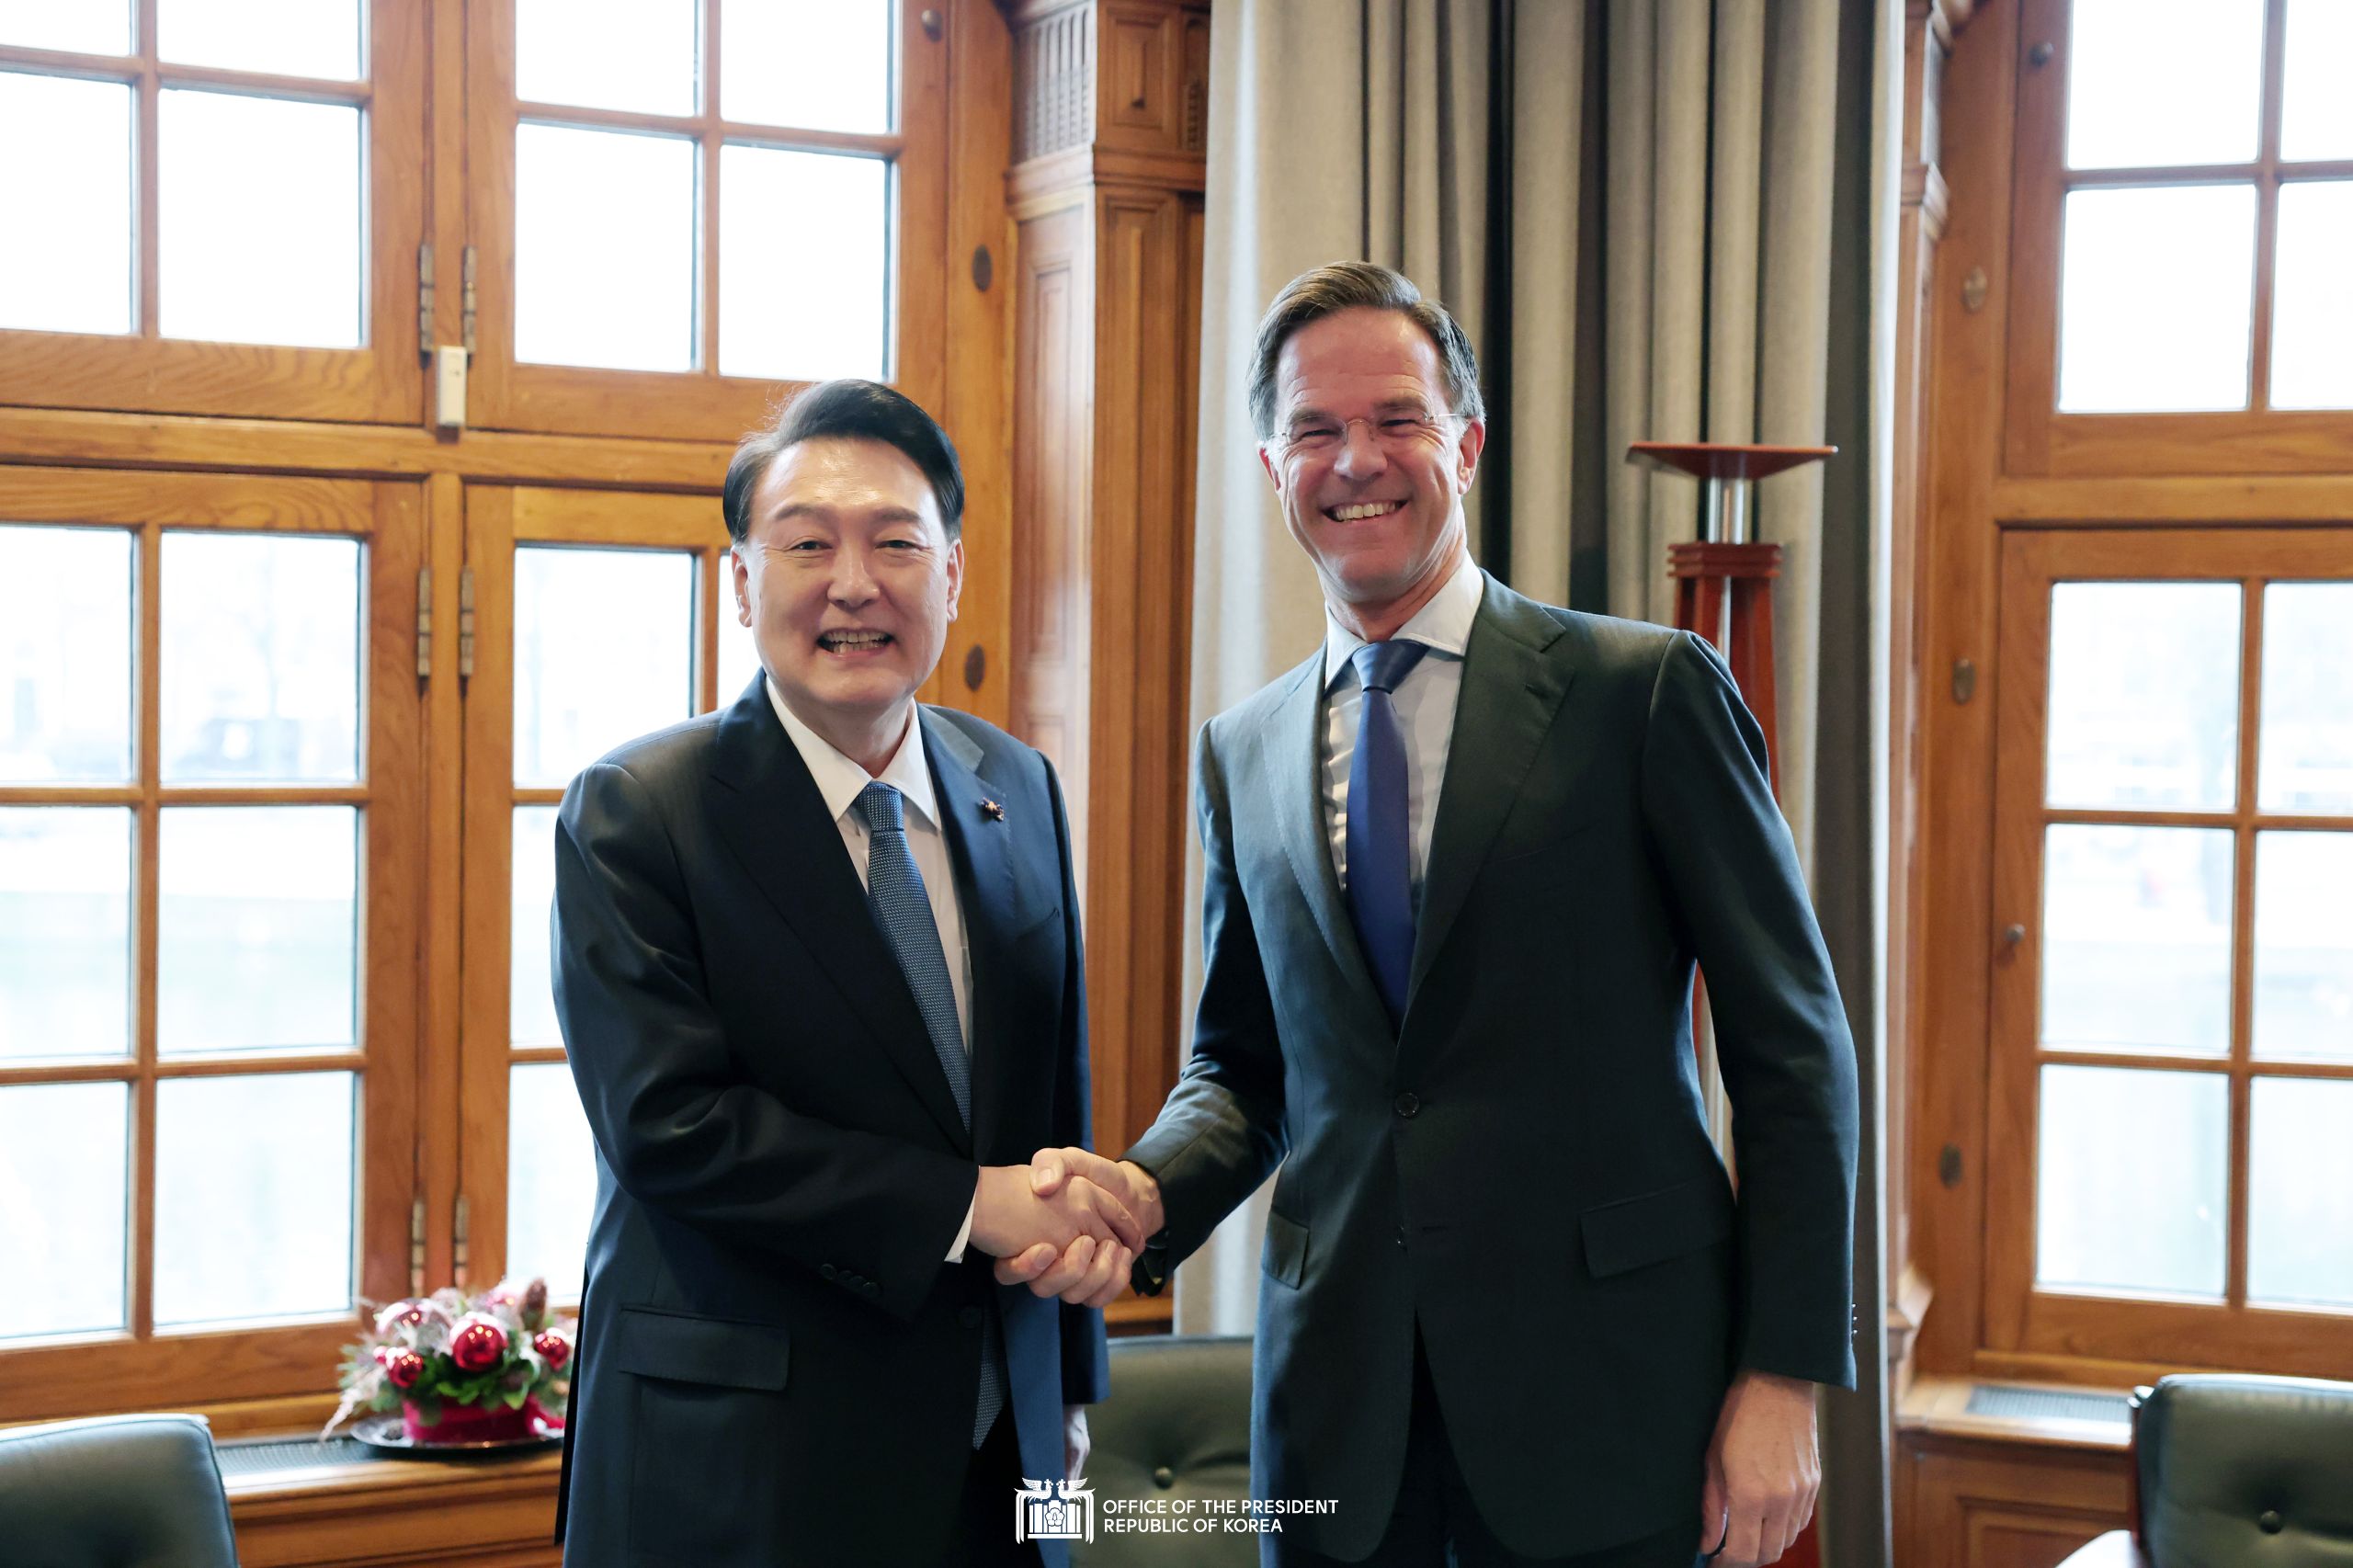 Meeting with Prime Minister Mark Rutte of the Netherlands